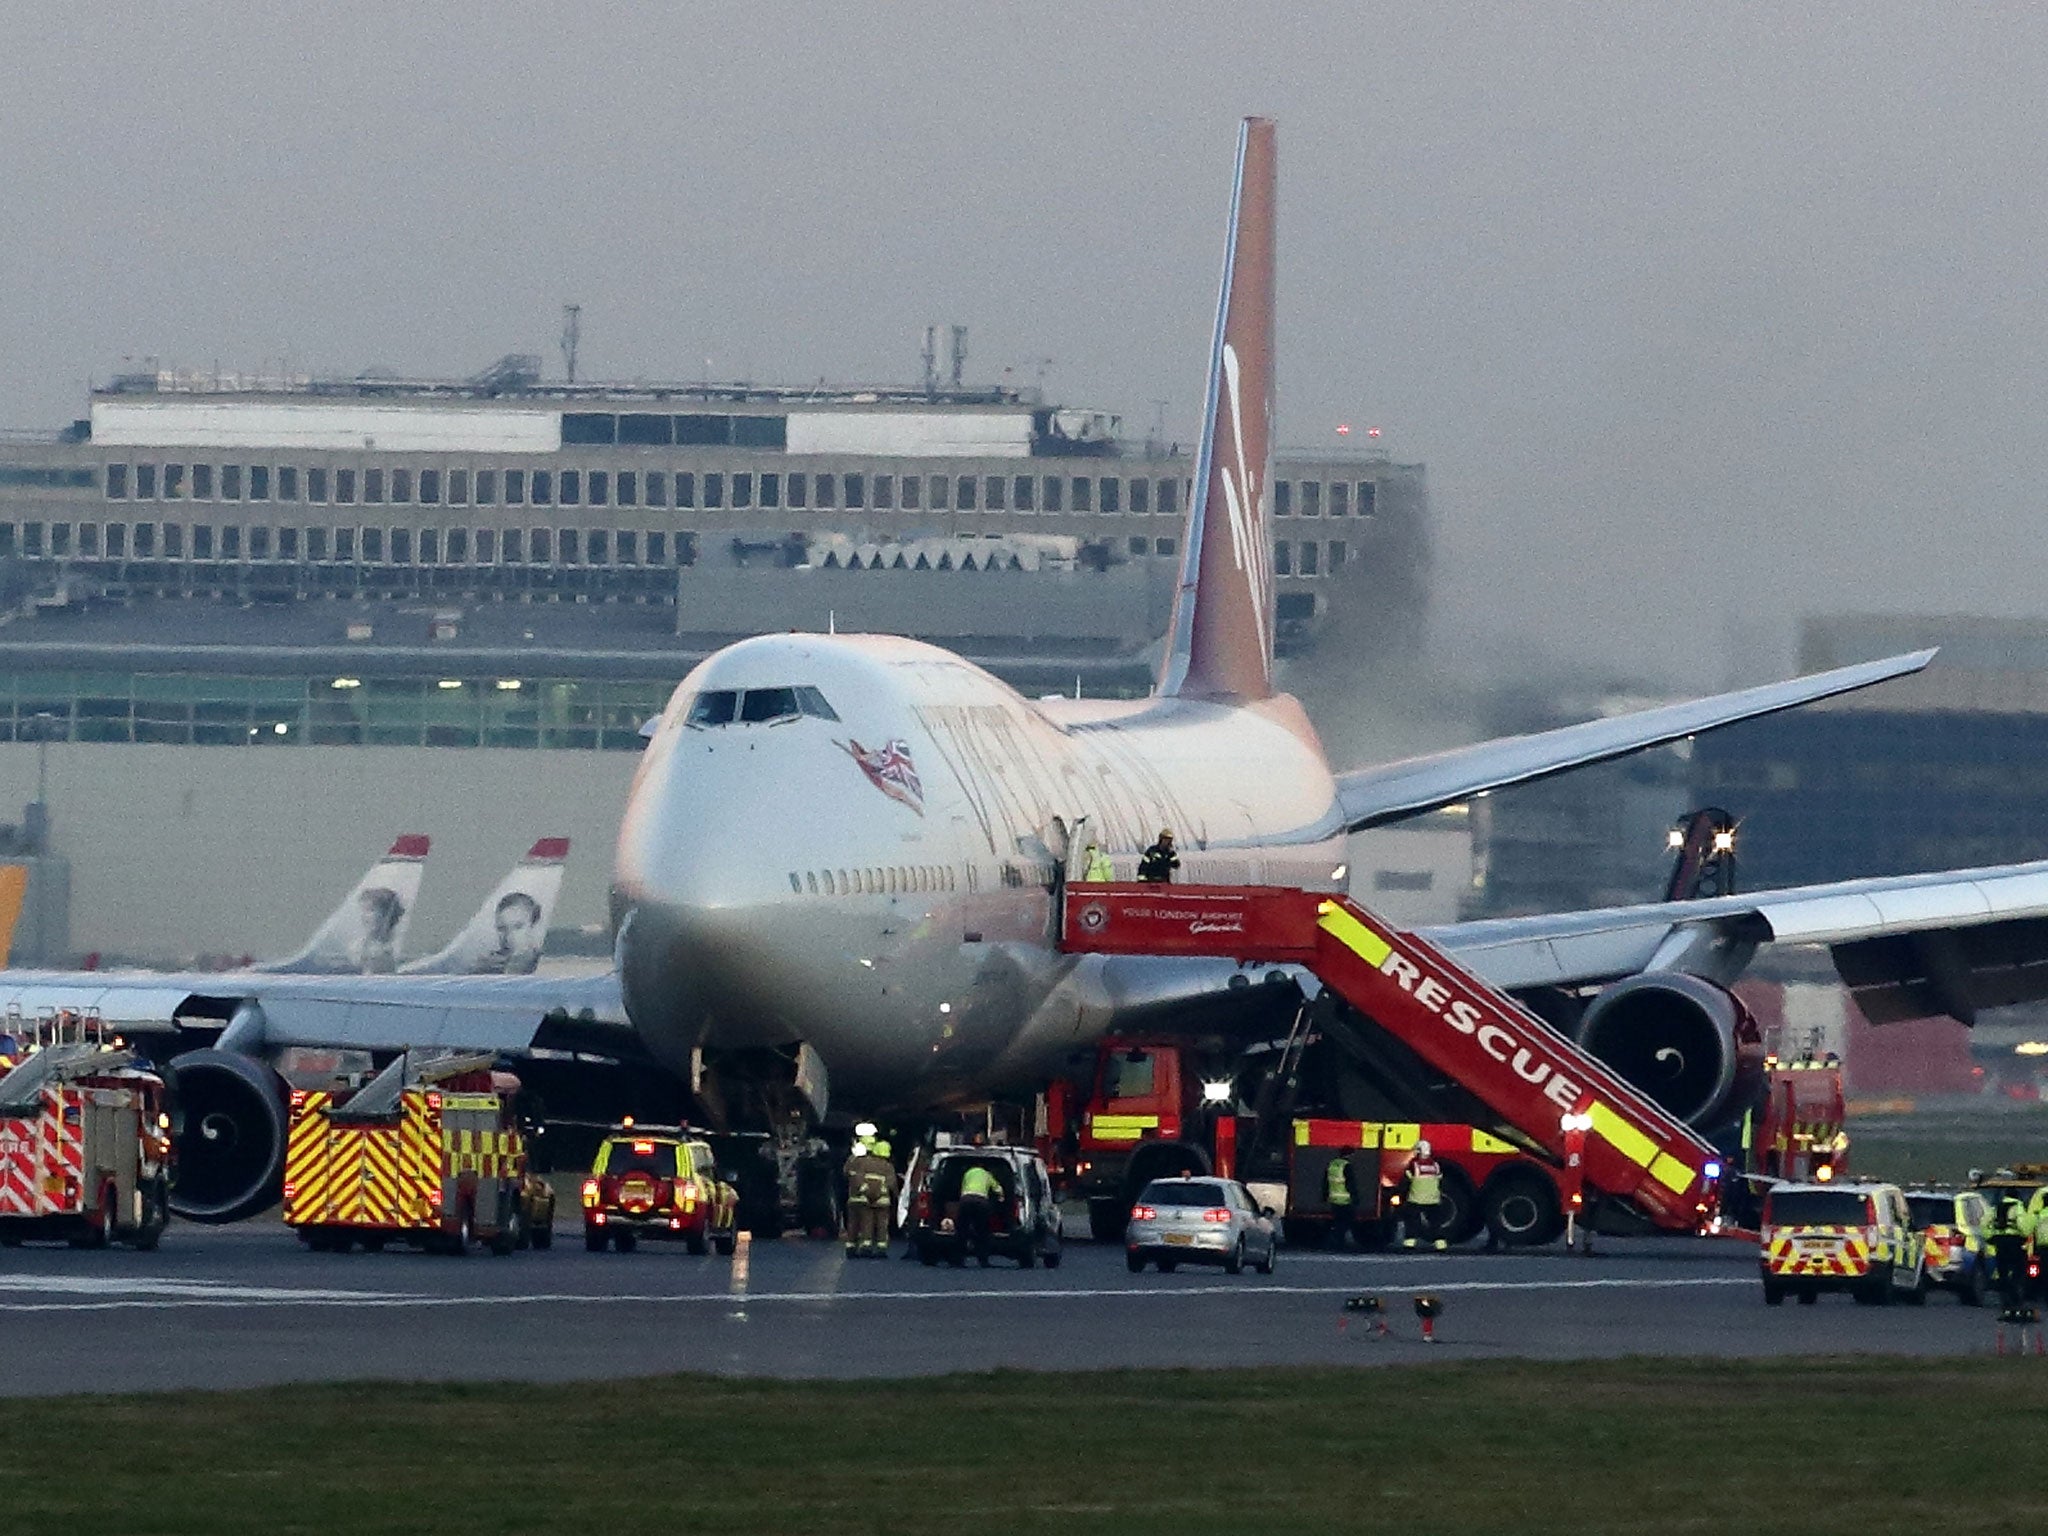 Emergency vehicles attend to the Virgin Atlantic Boeing 747 at Gatwick airport in West Sussex in London